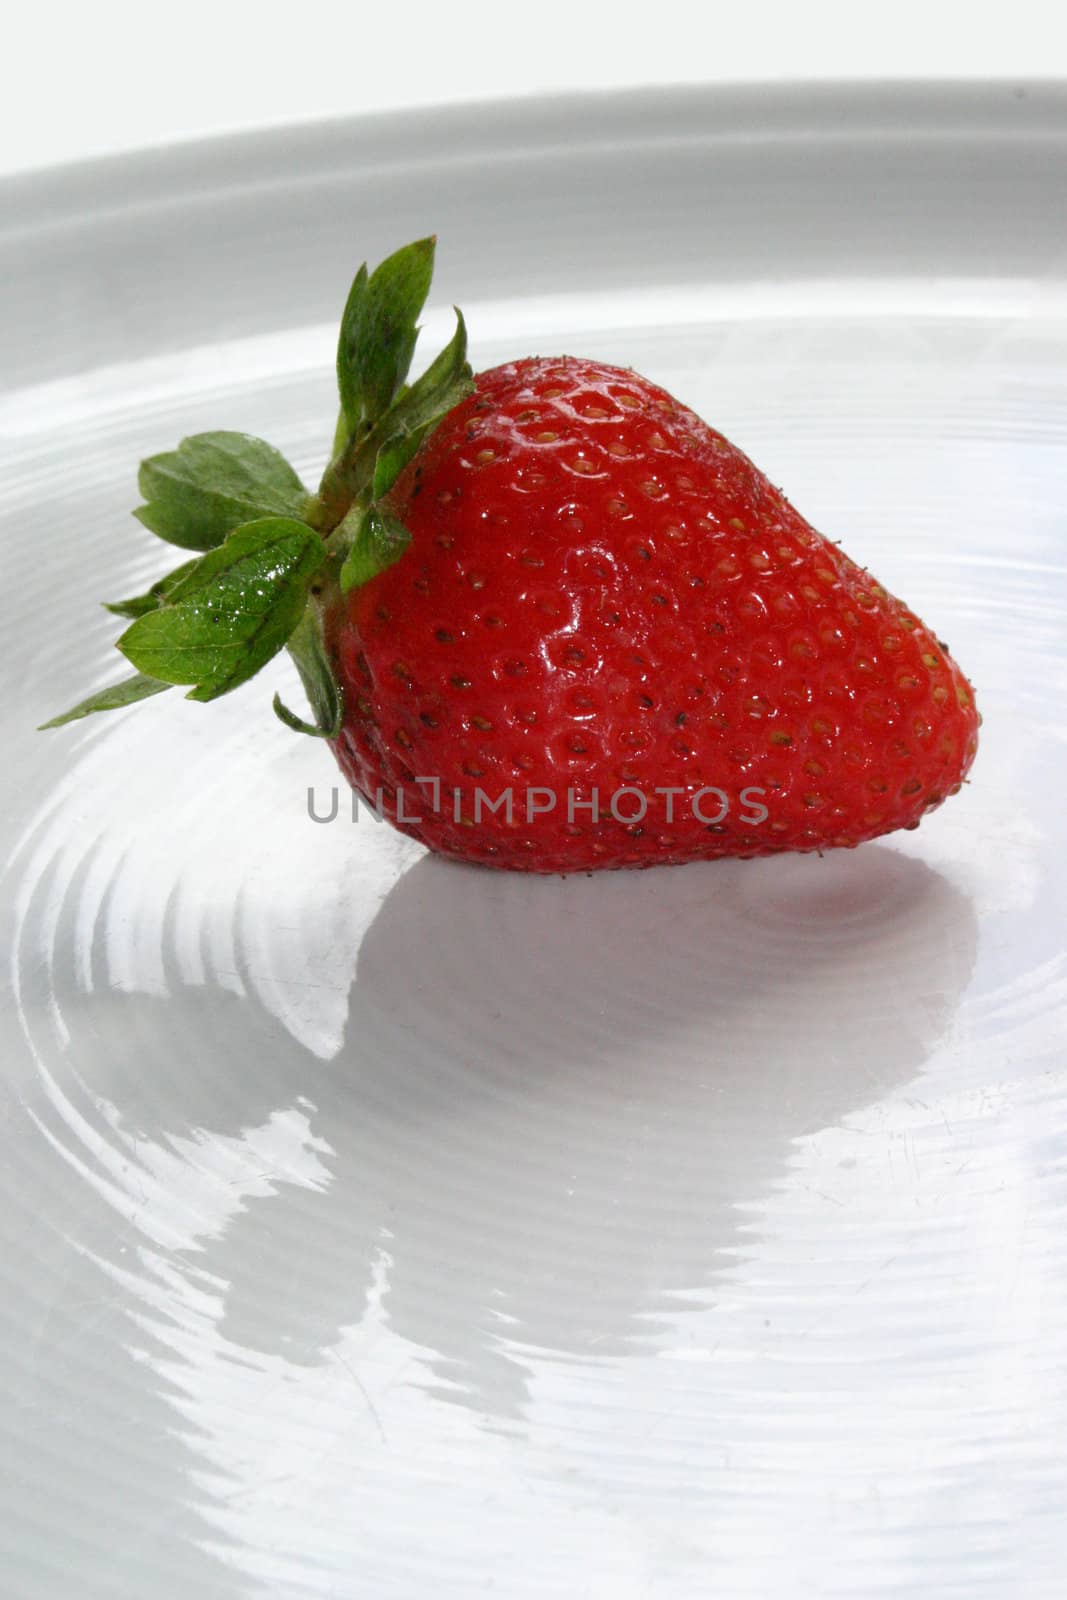 An isolated red strawberry on white dish